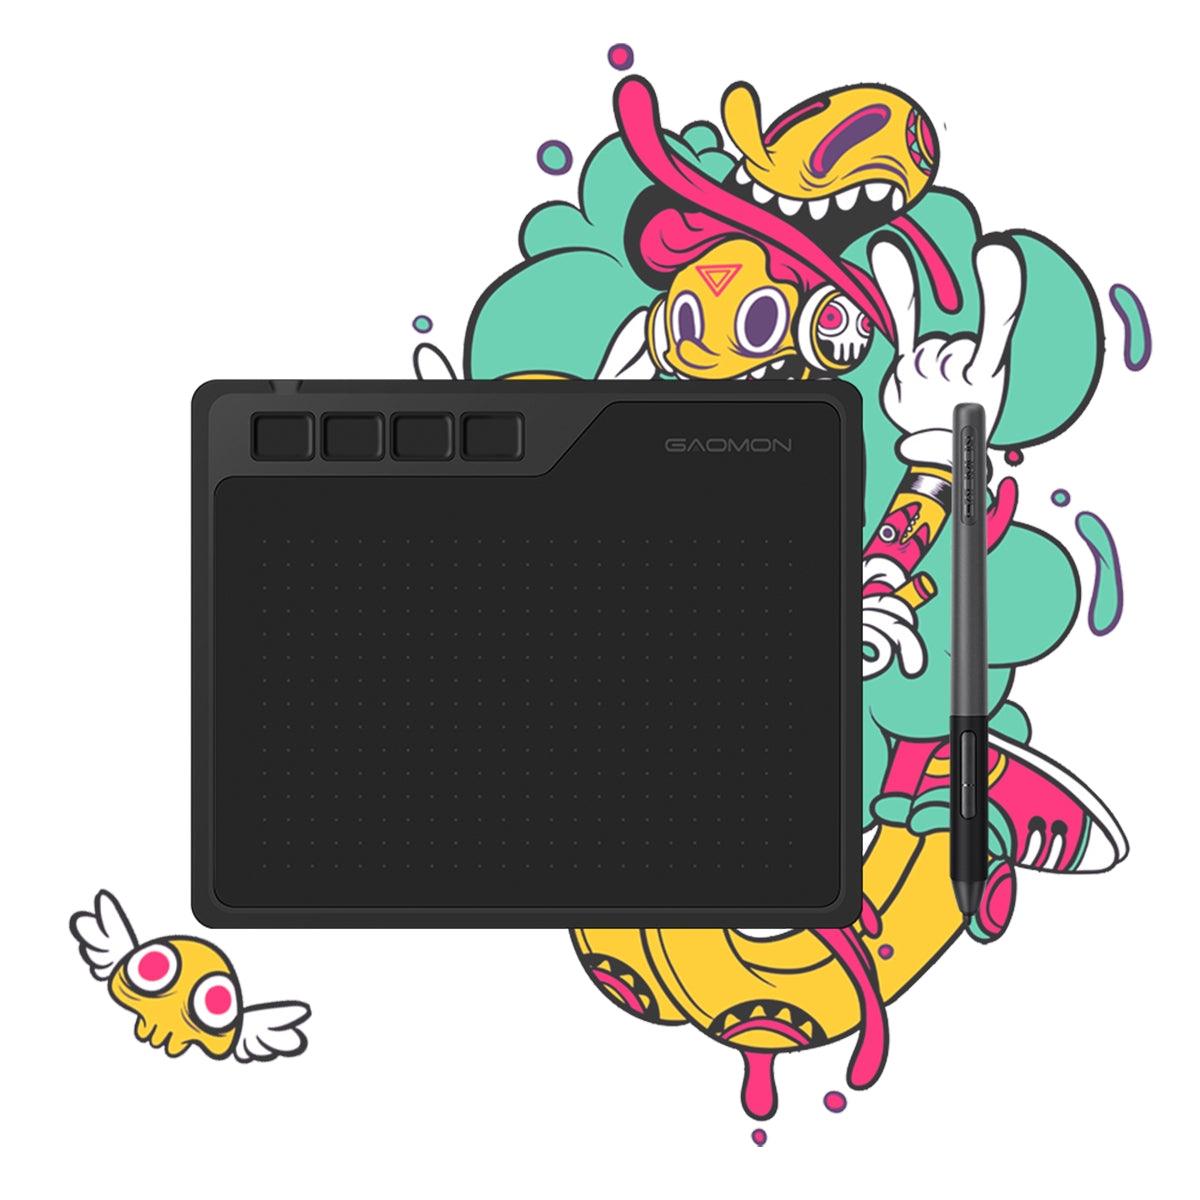 GAOMON S620 Small Size Graphics Tablet for Osu! and Note-taking